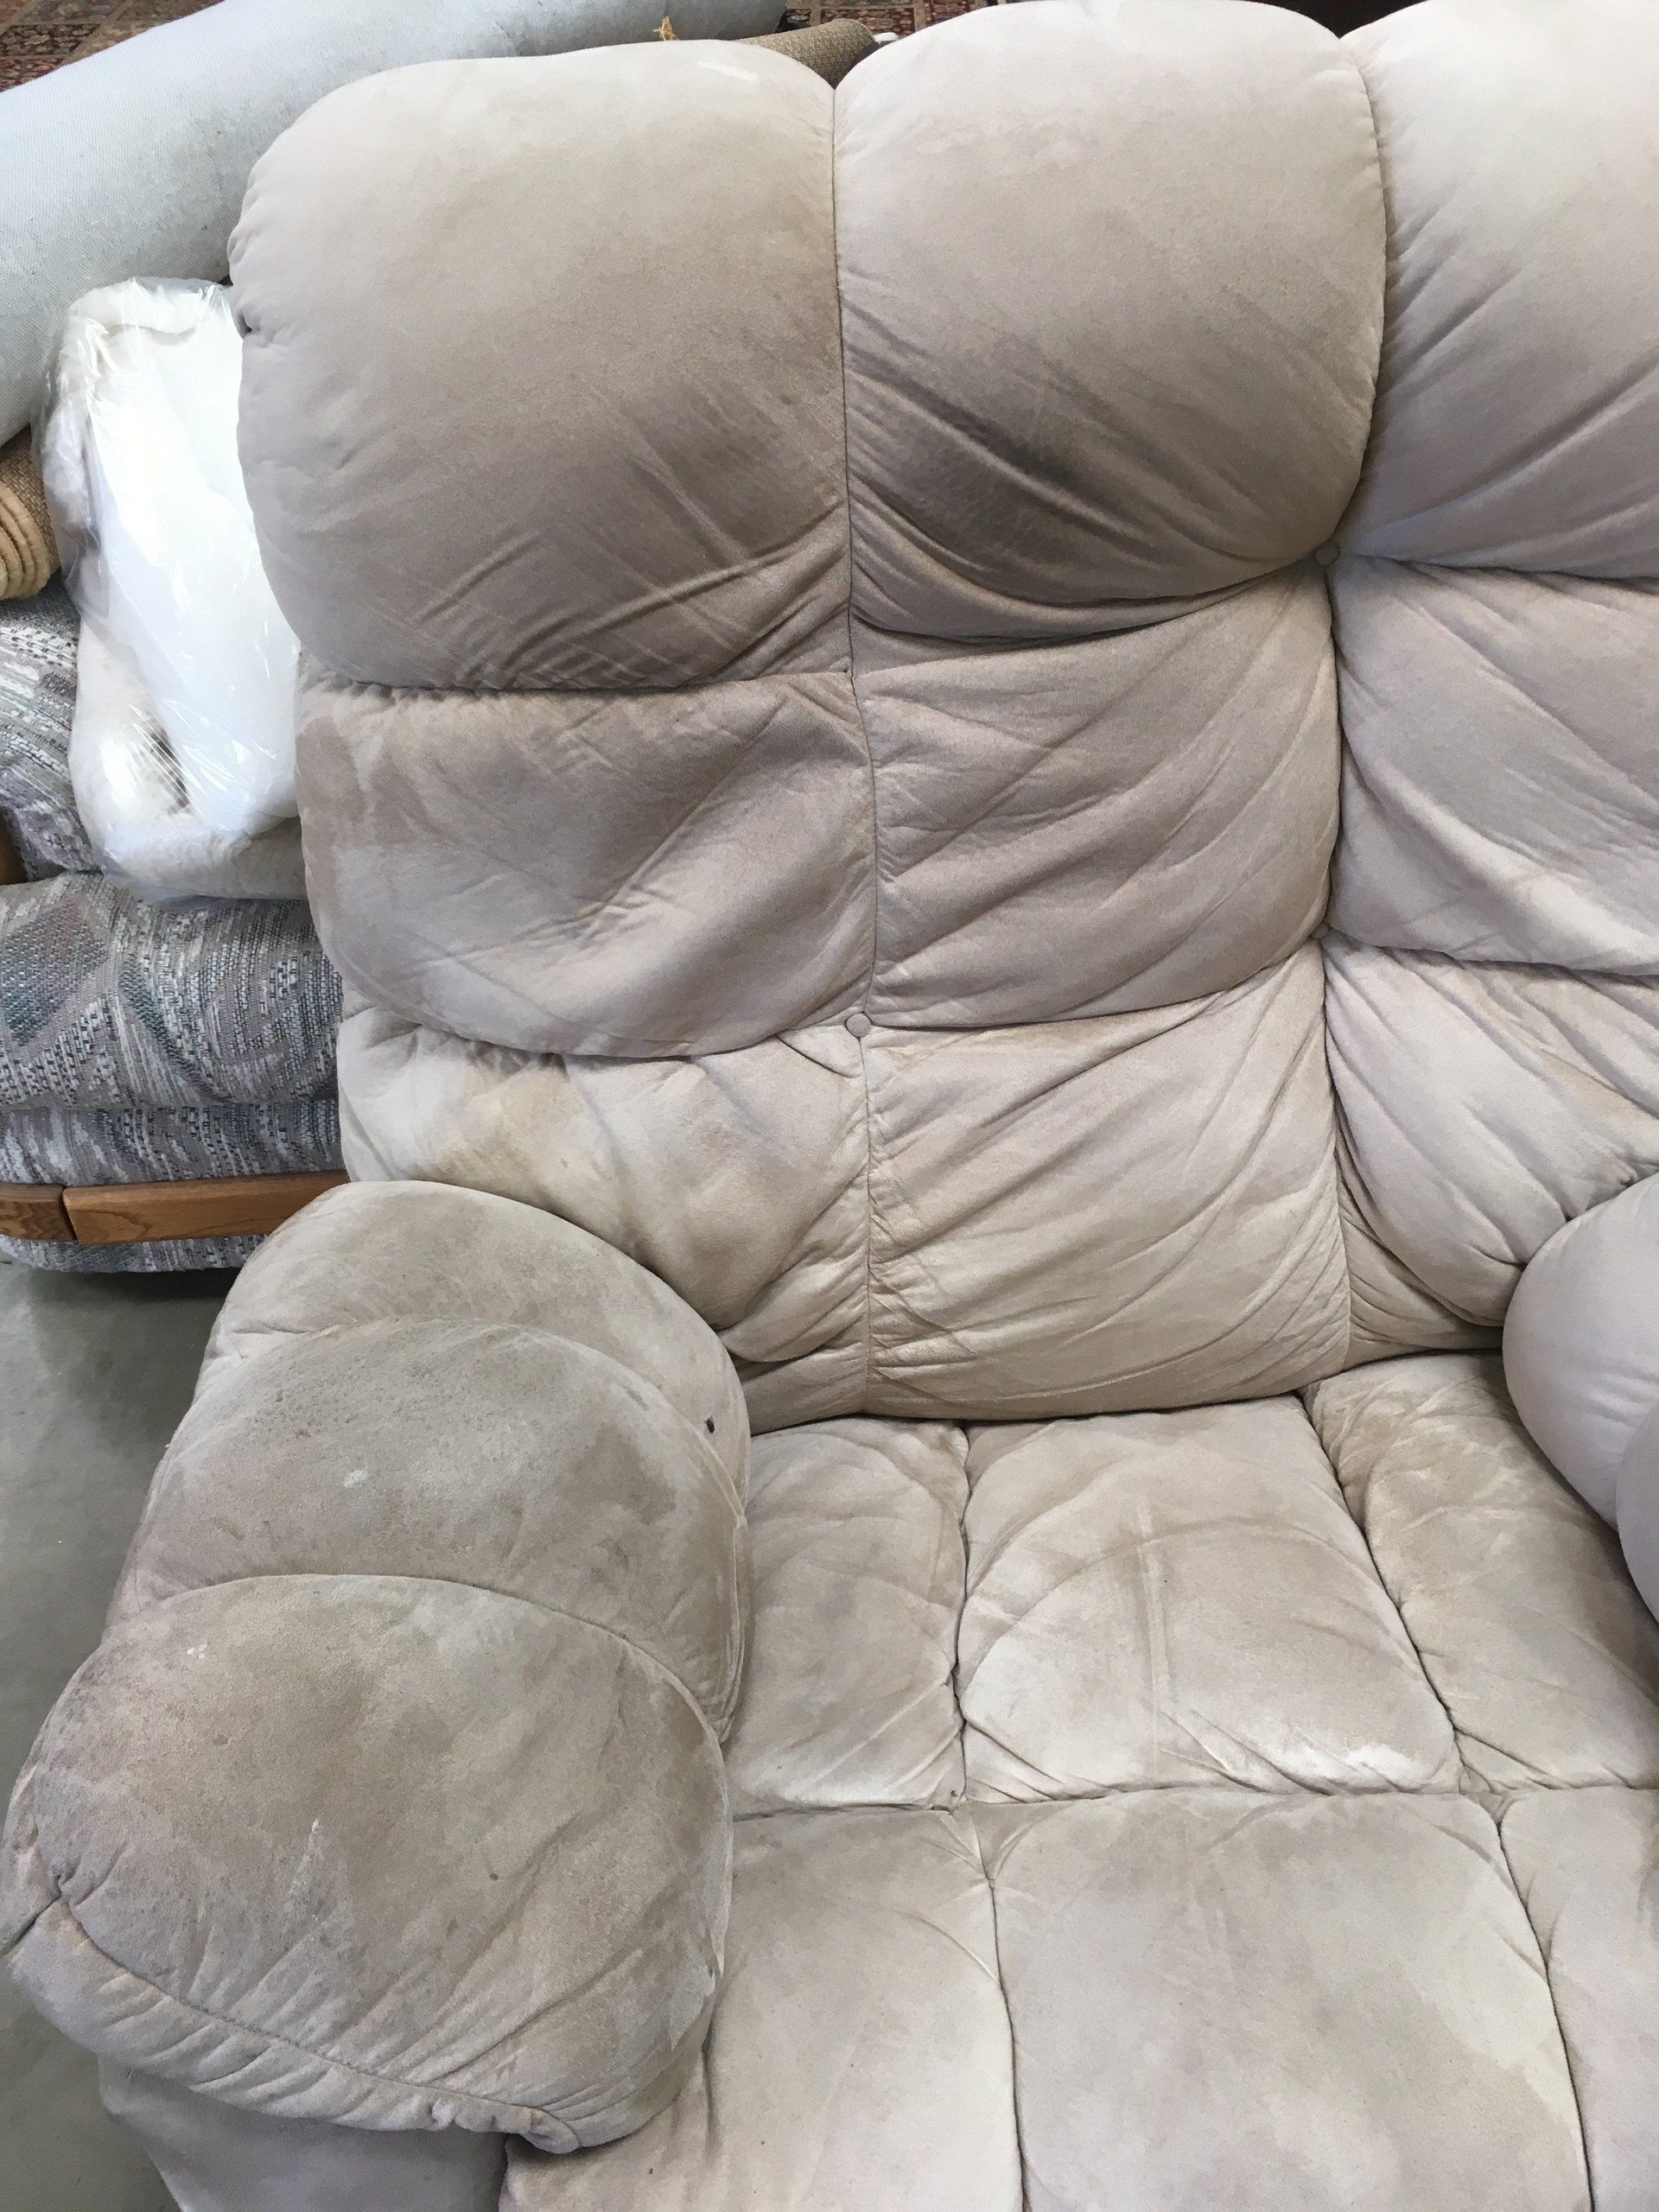 Upholstery Cleaning Amarillo, TX